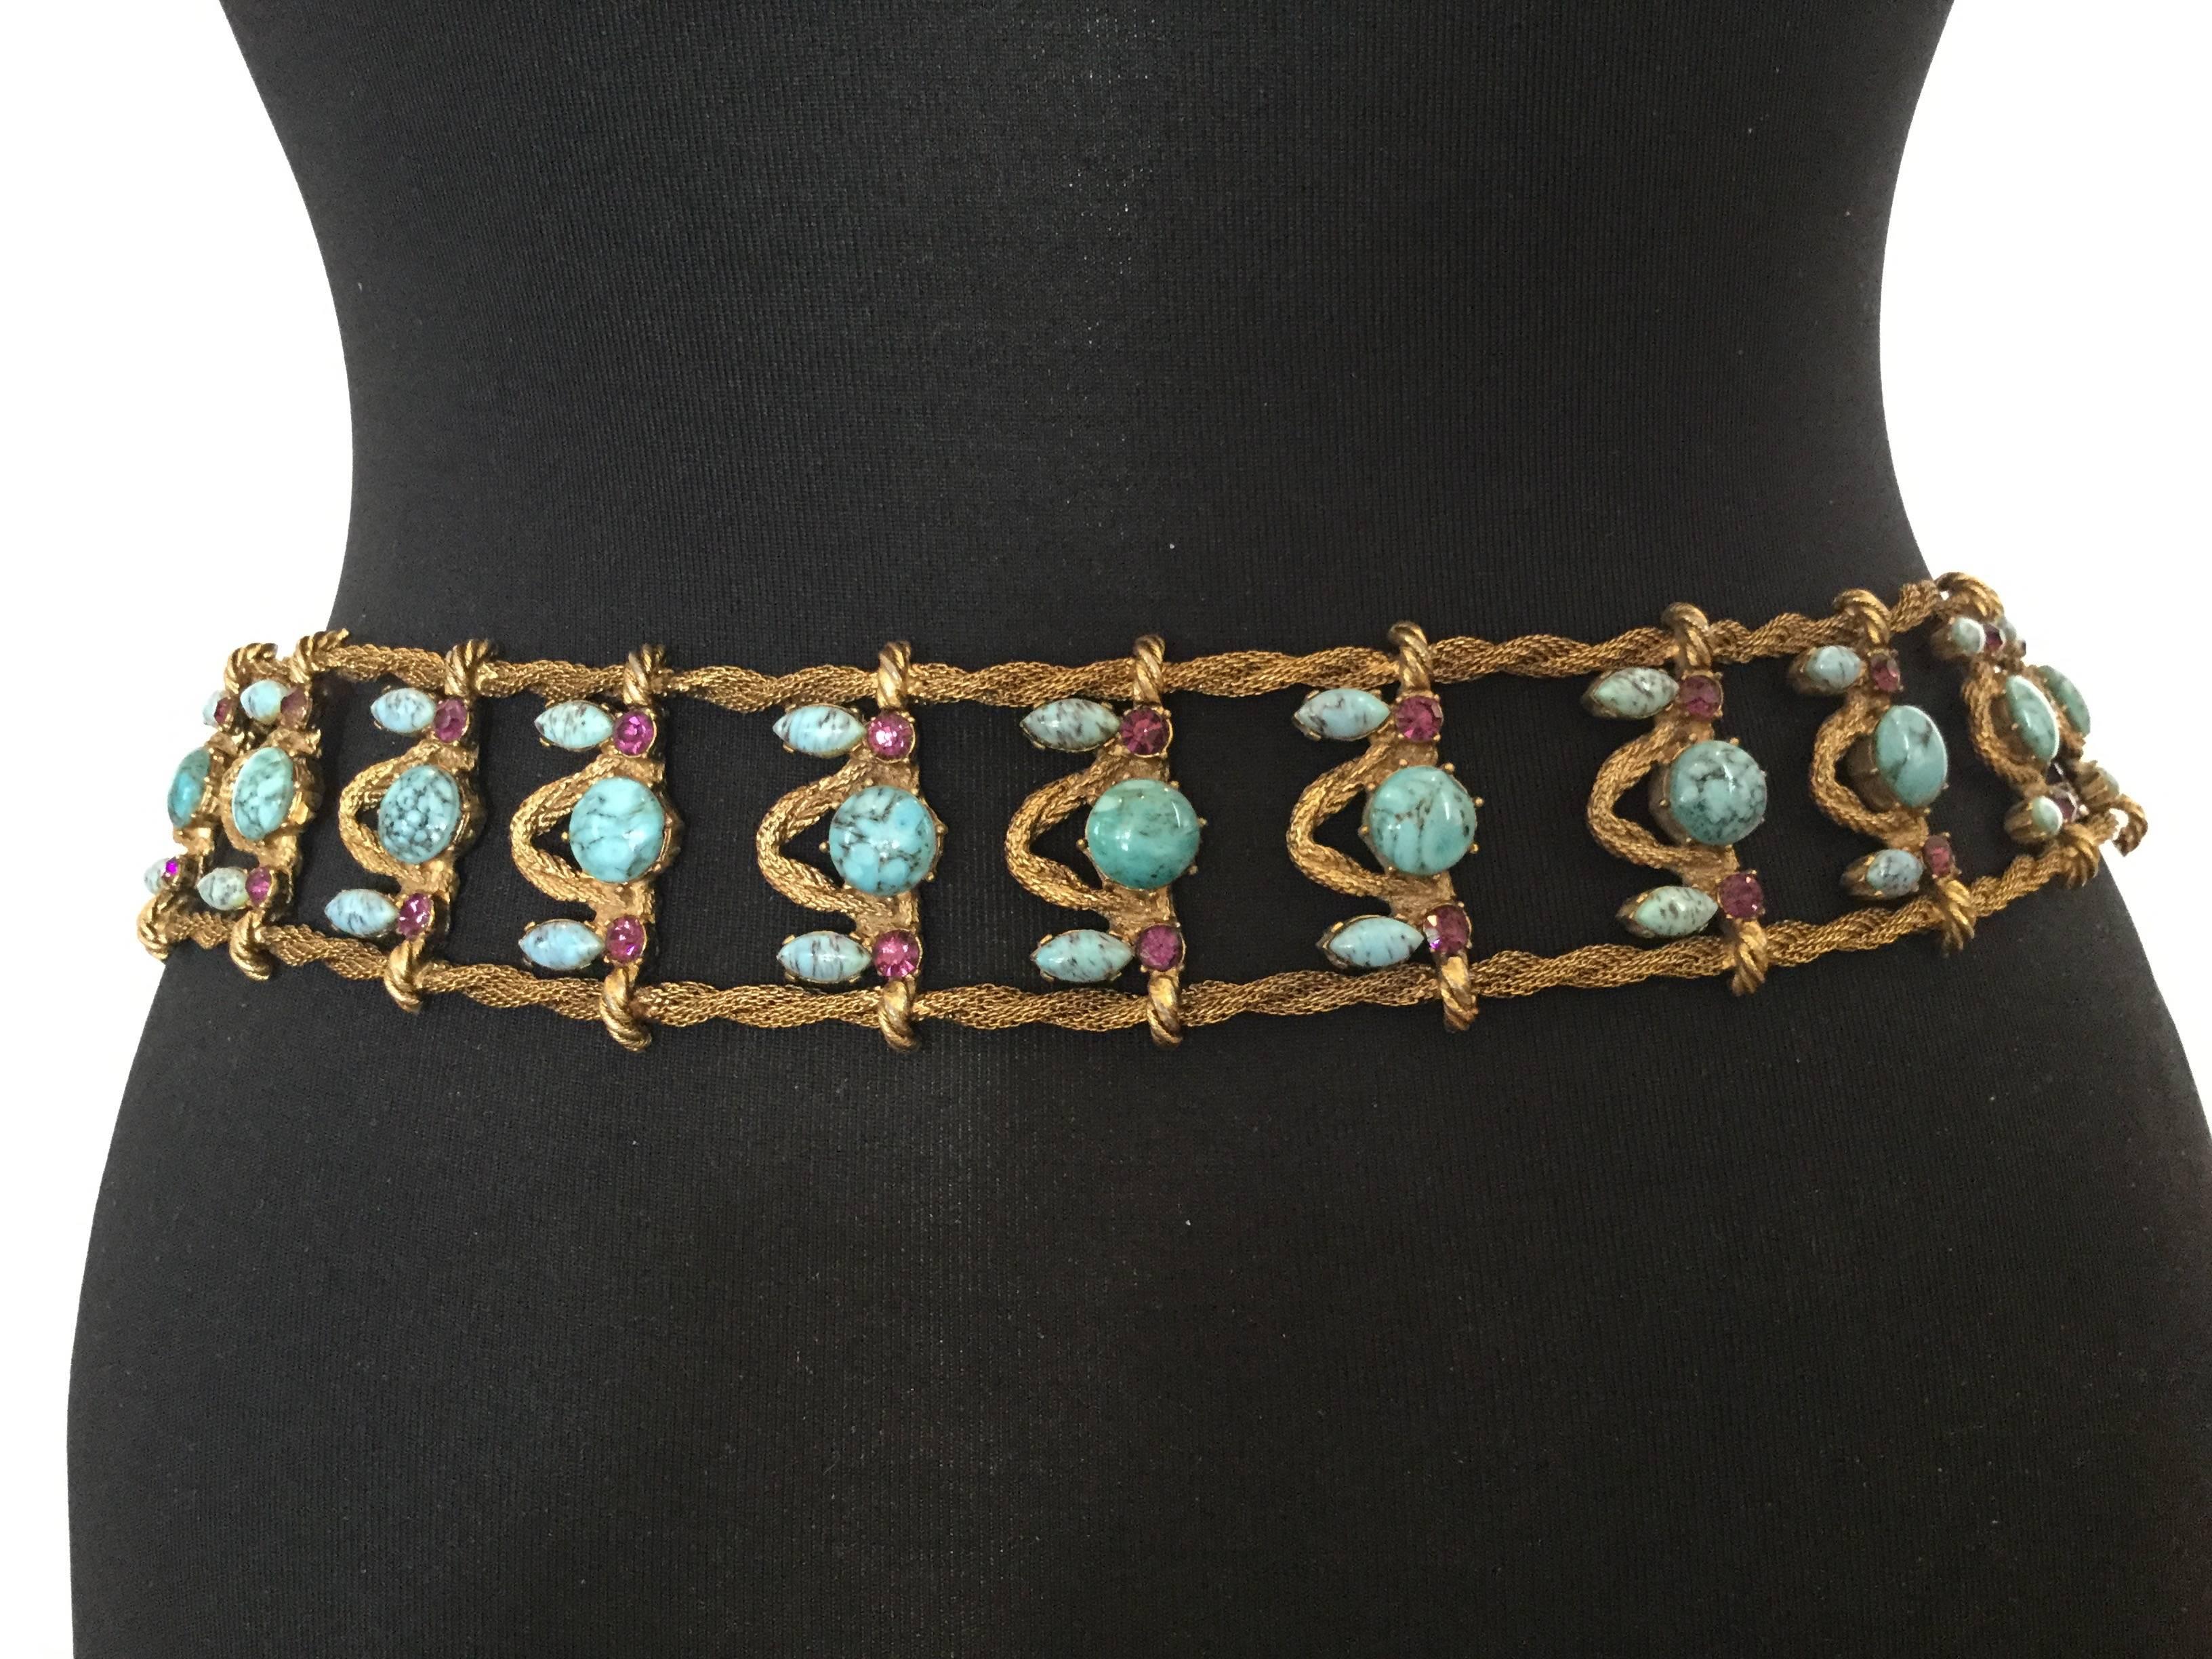 Incredible Yves Saint Laurent Metal Belt with Faux Turquoise Cabochons. 1970's. 1